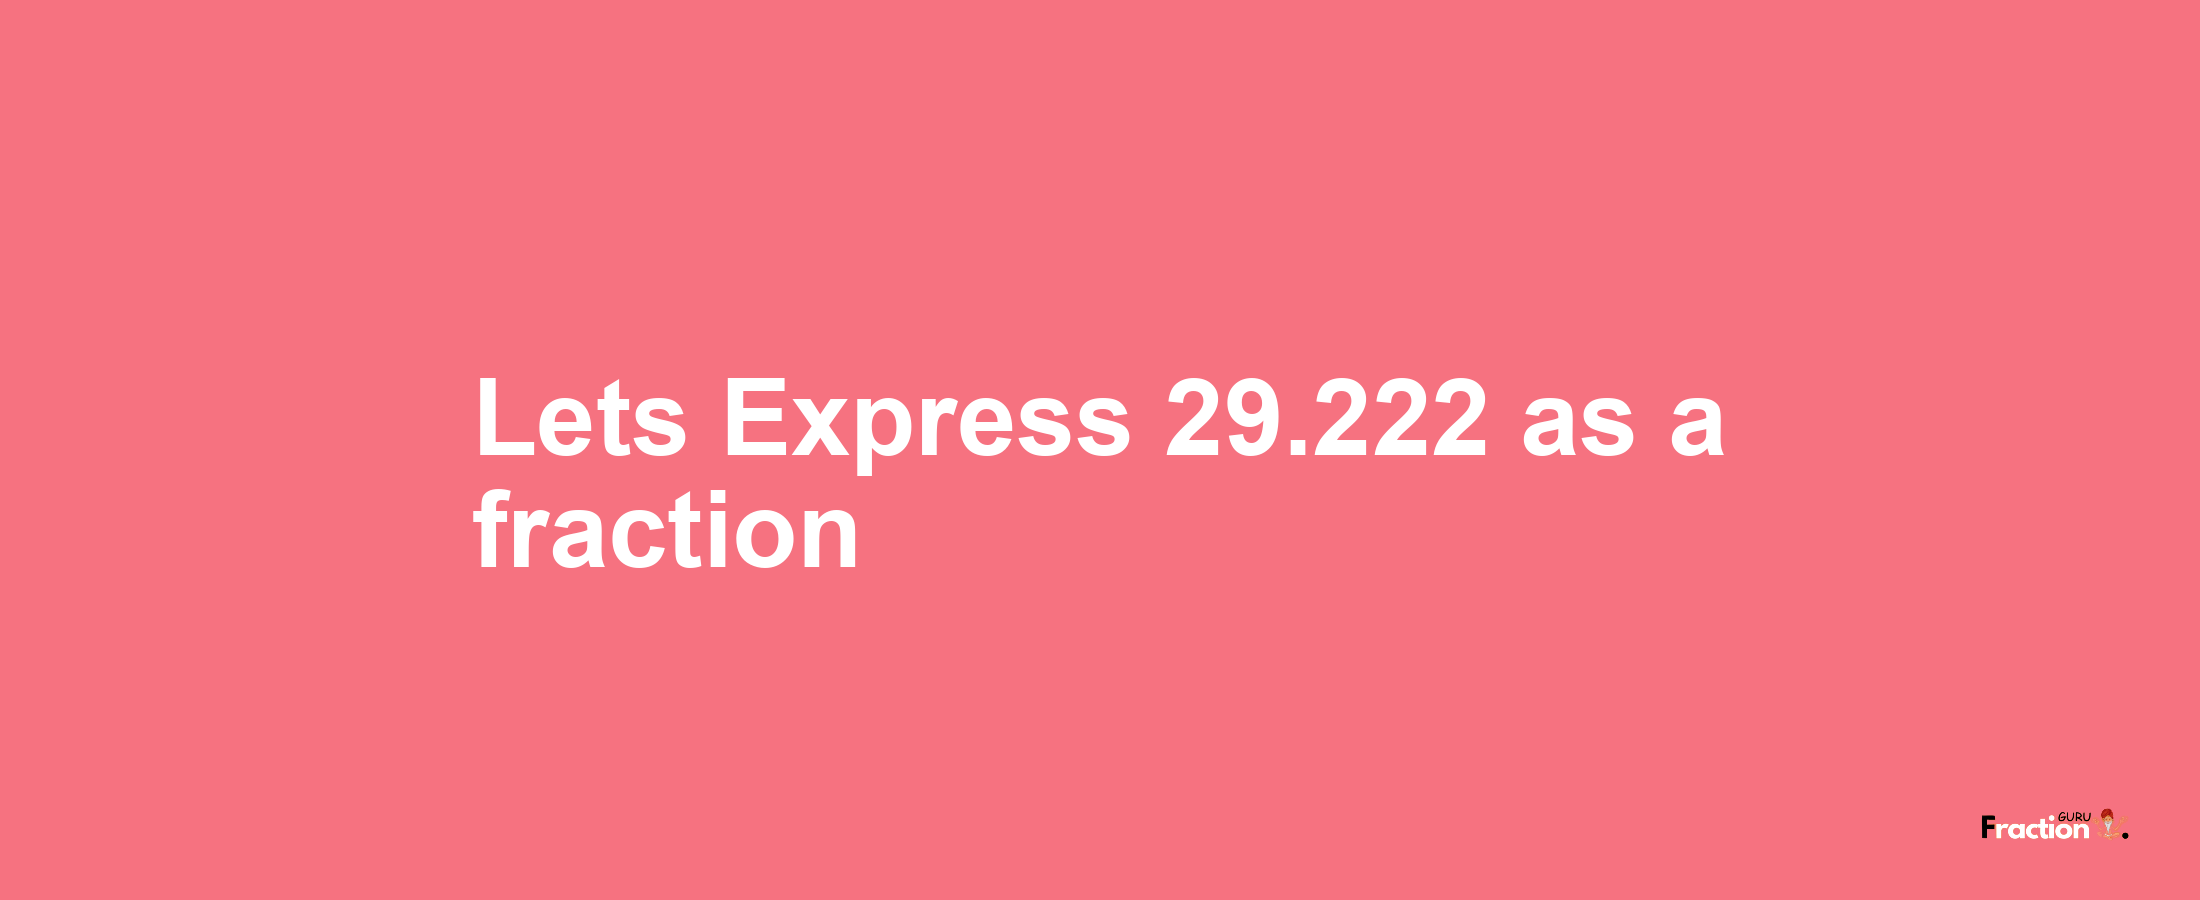 Lets Express 29.222 as afraction